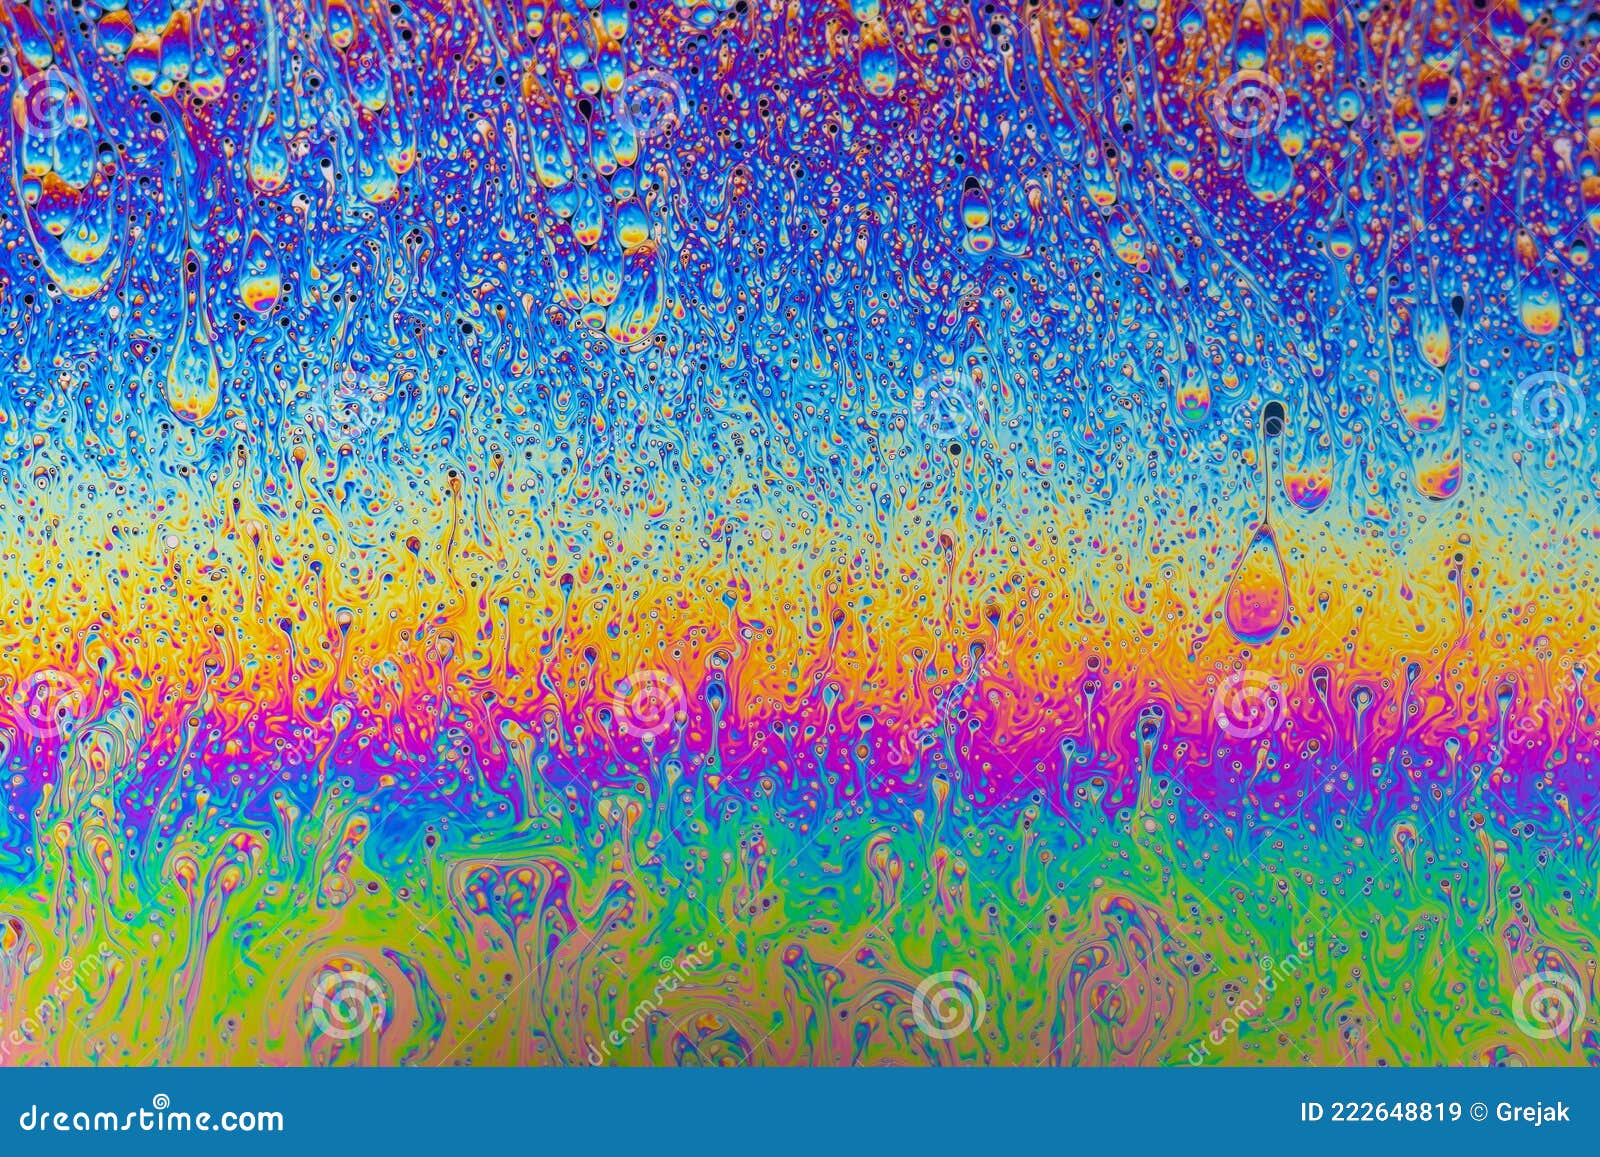 Soap Bubble Abstract Art Patterns Stock Image - Image of pattern, fluid ...